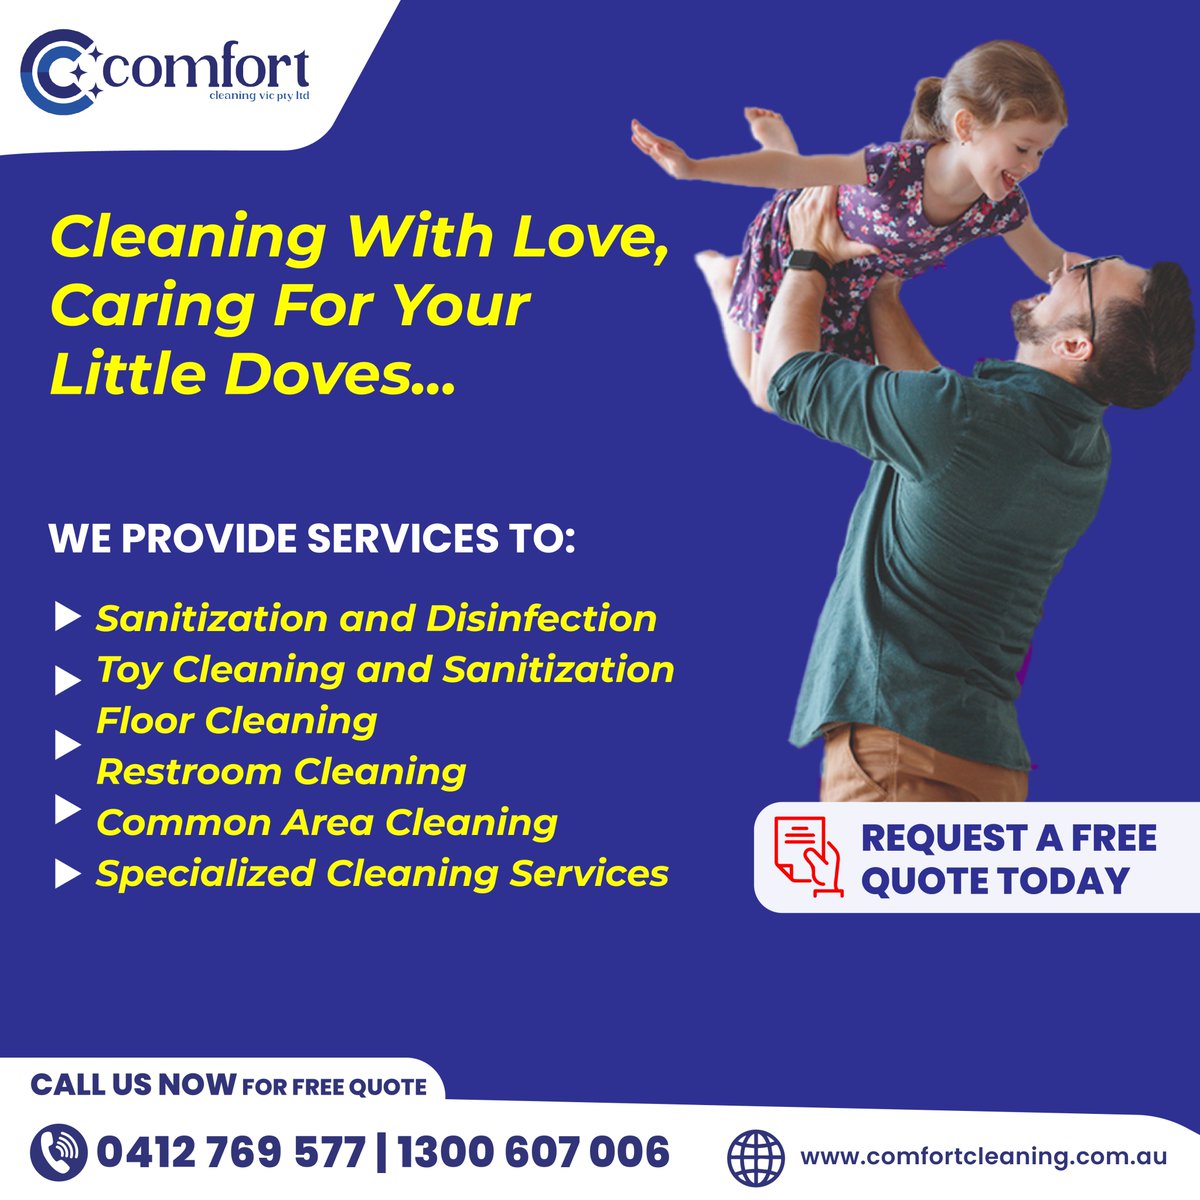 Let us handle the dirty work while you focus on what matters most. Our expert team is here to make your space shine! #ProfessionalCleaners #CleanHome #CleaningExperts #TopCleaners #HomeRefresh #HouseClean #ExpertCleaning #TidyHome #CleanSpaceHappyPlace #HomeOrganization